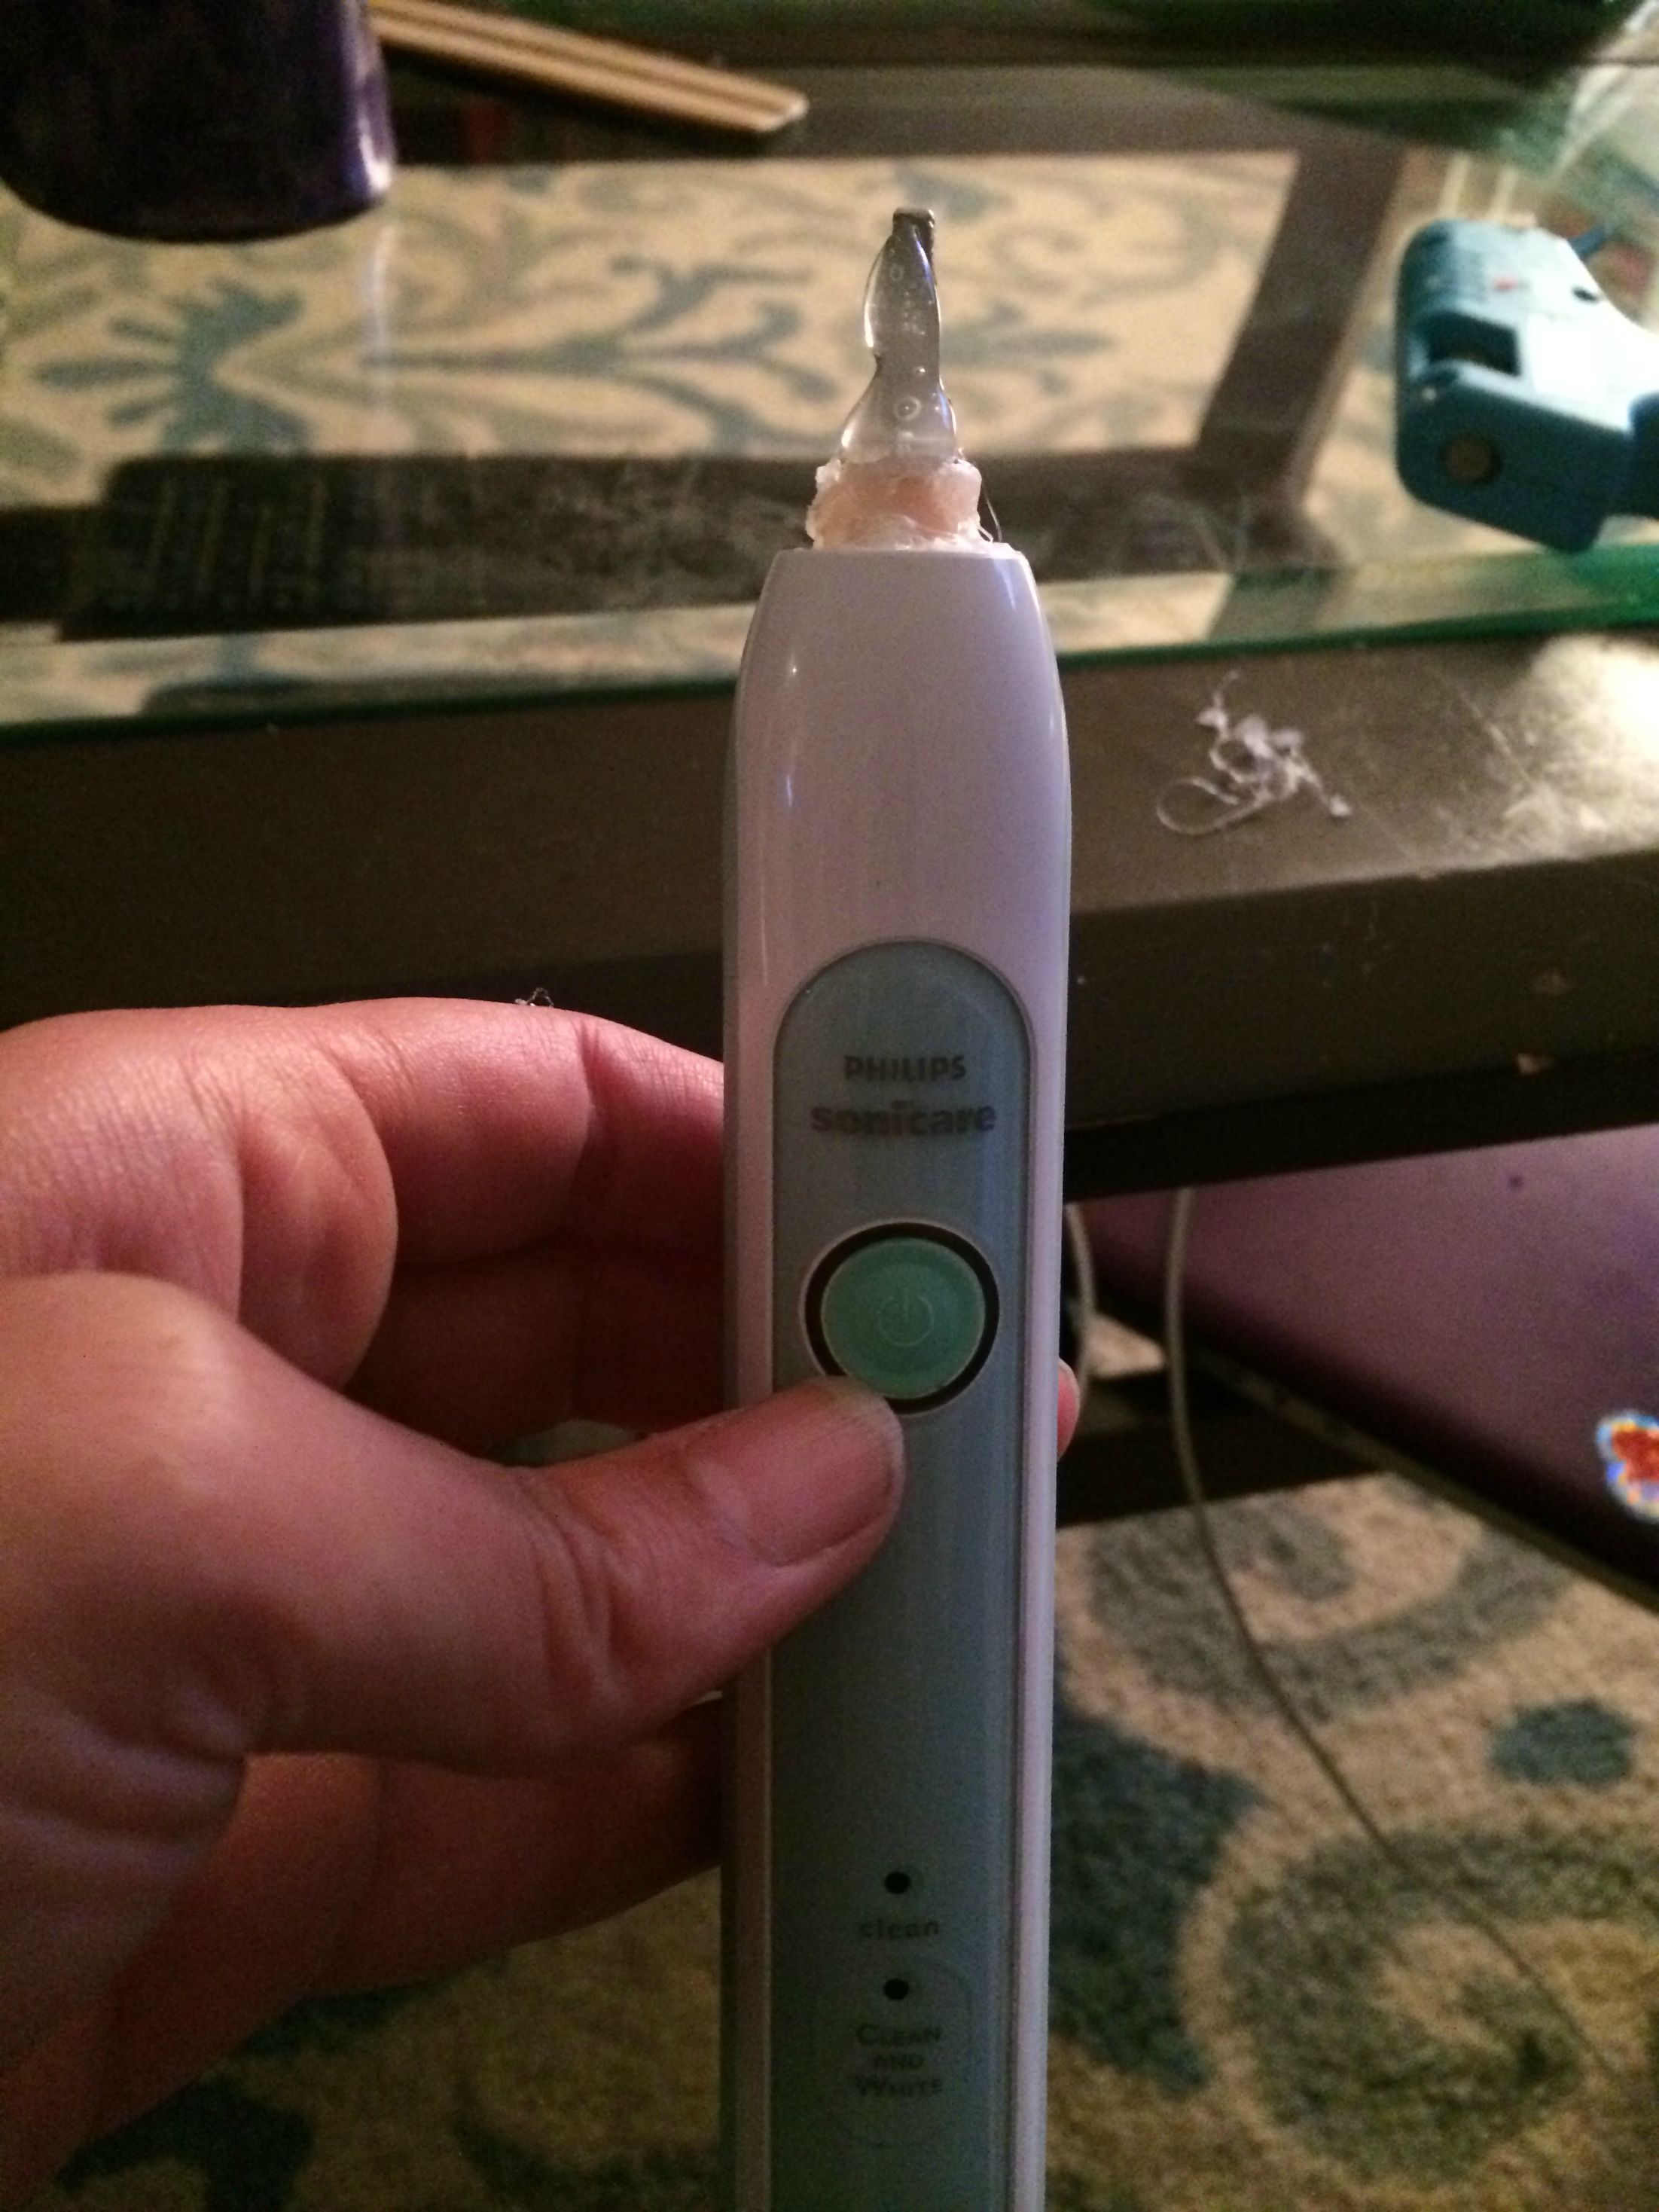 Frugal Couple Use Their Mad DIY Skills to Make a Vibrator With a Hot ... pic picture